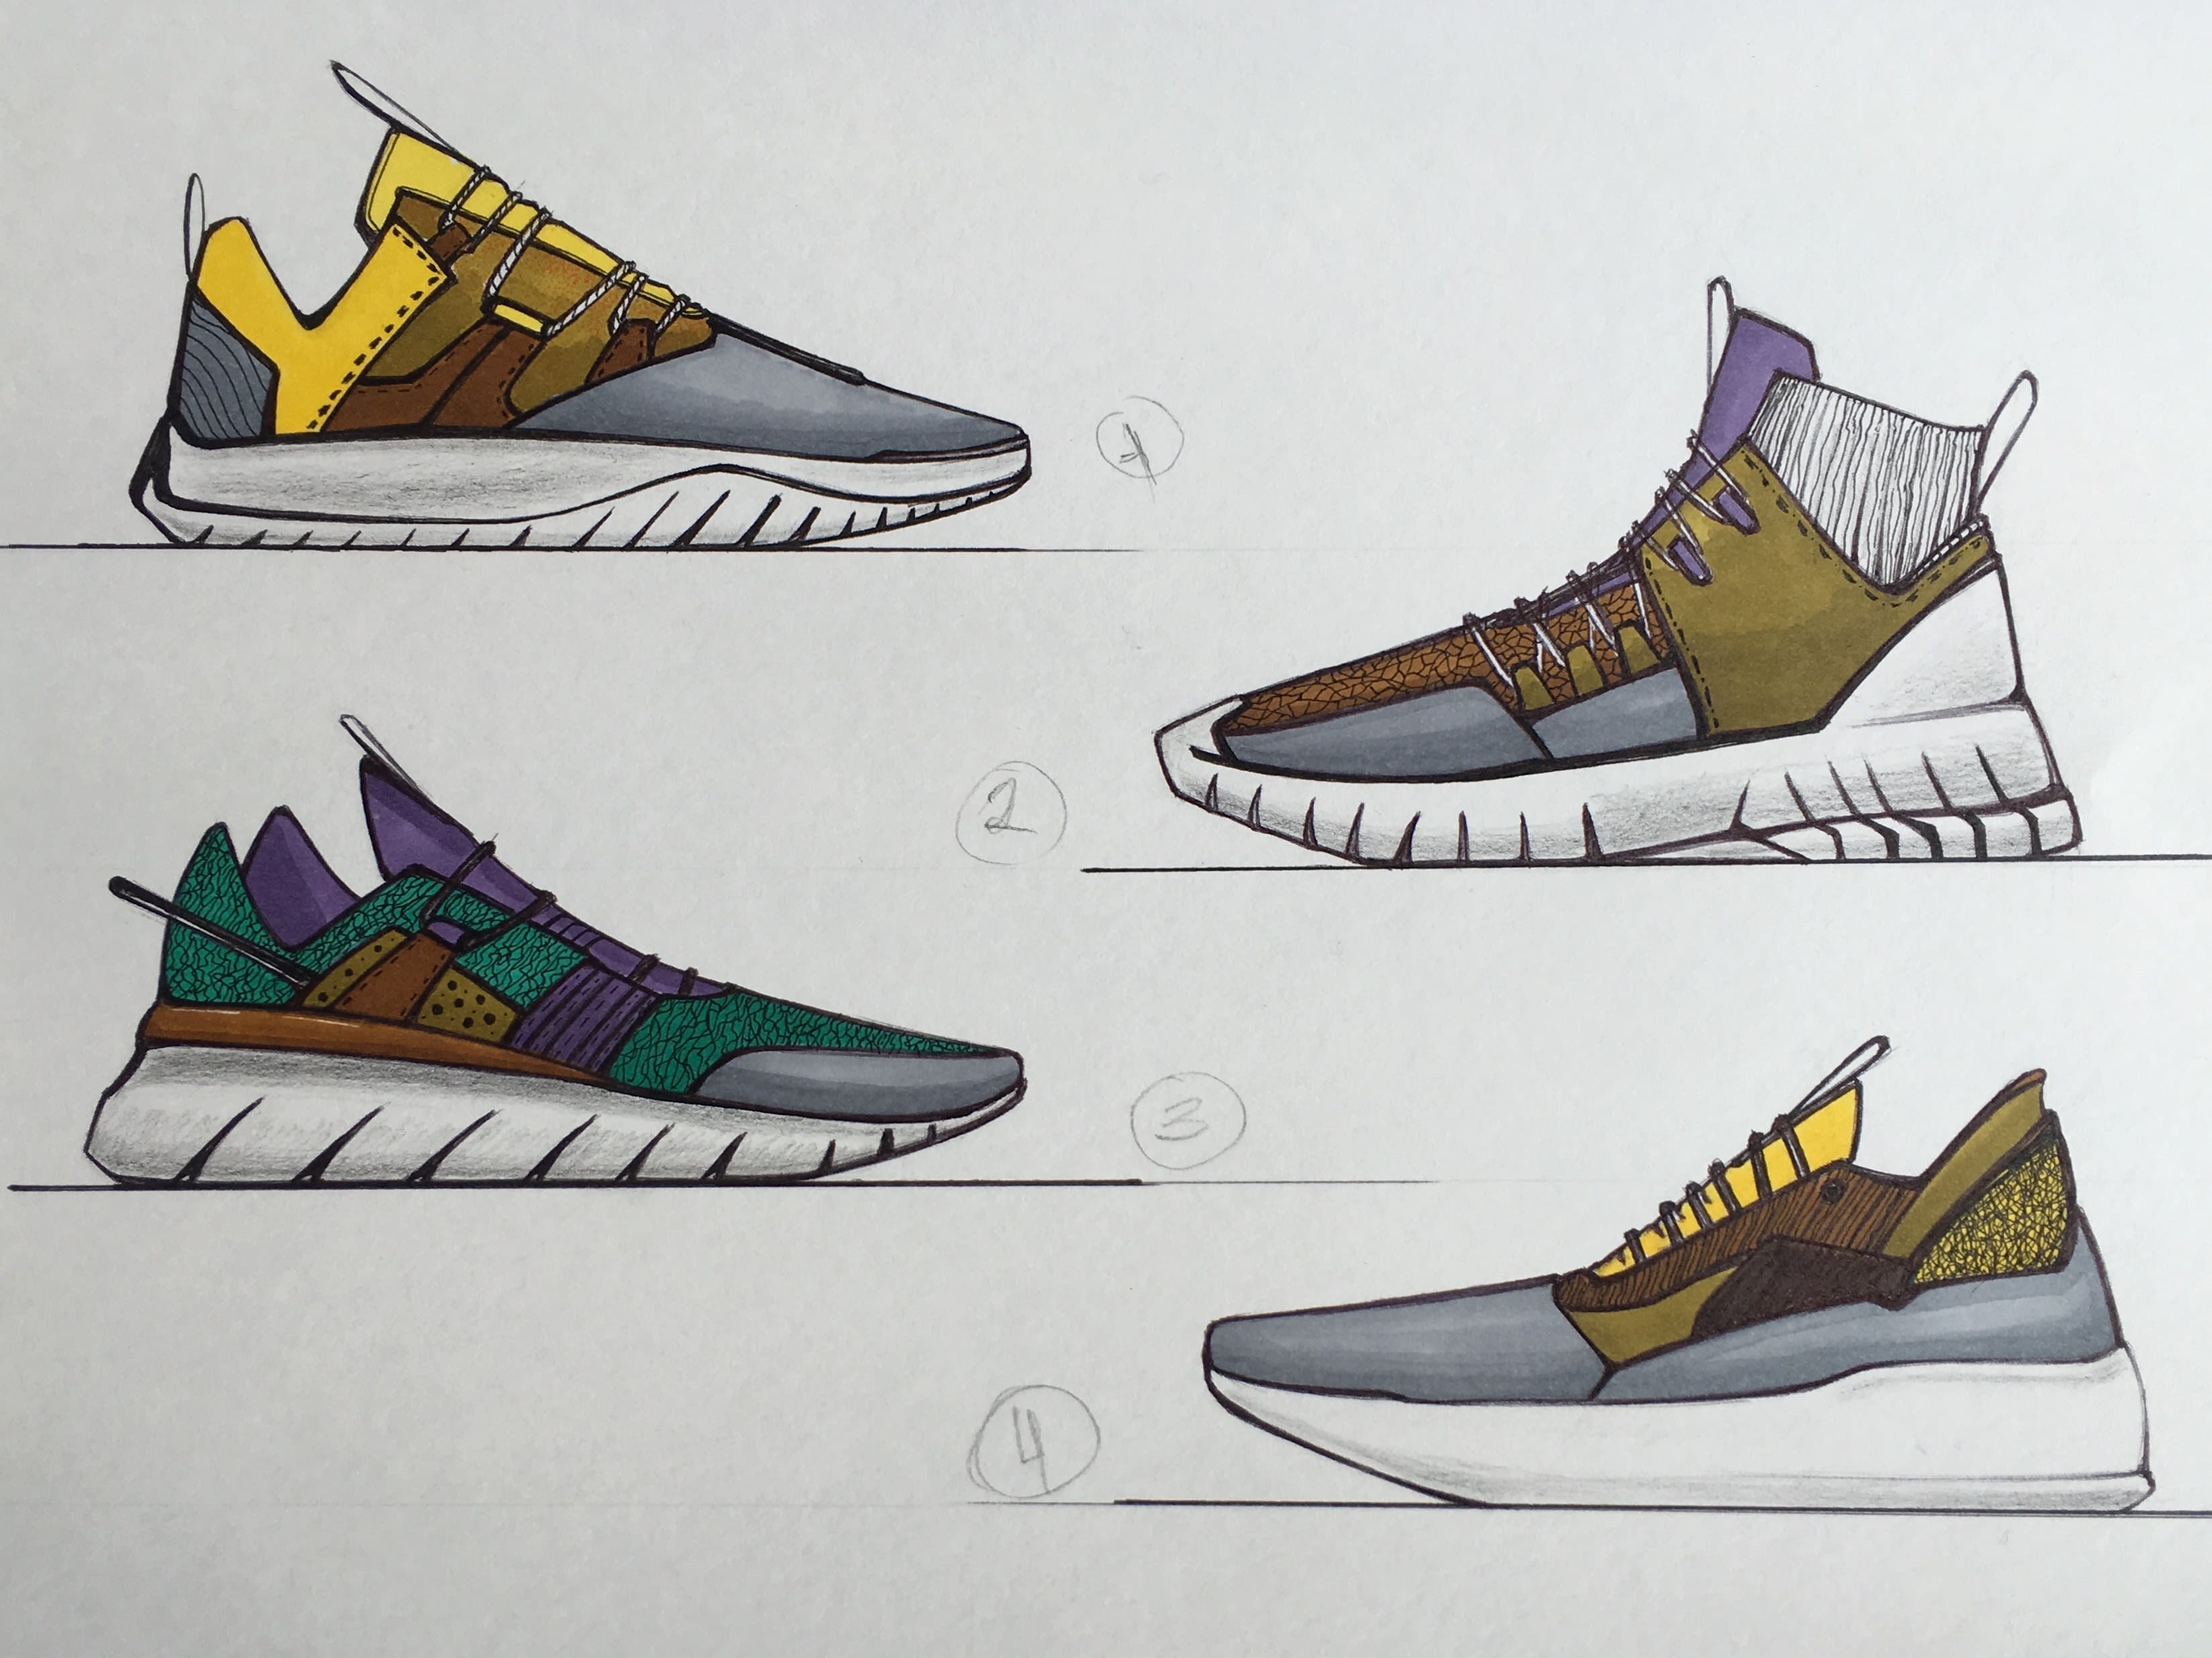 Design a sneaker concepts by Stanislove33